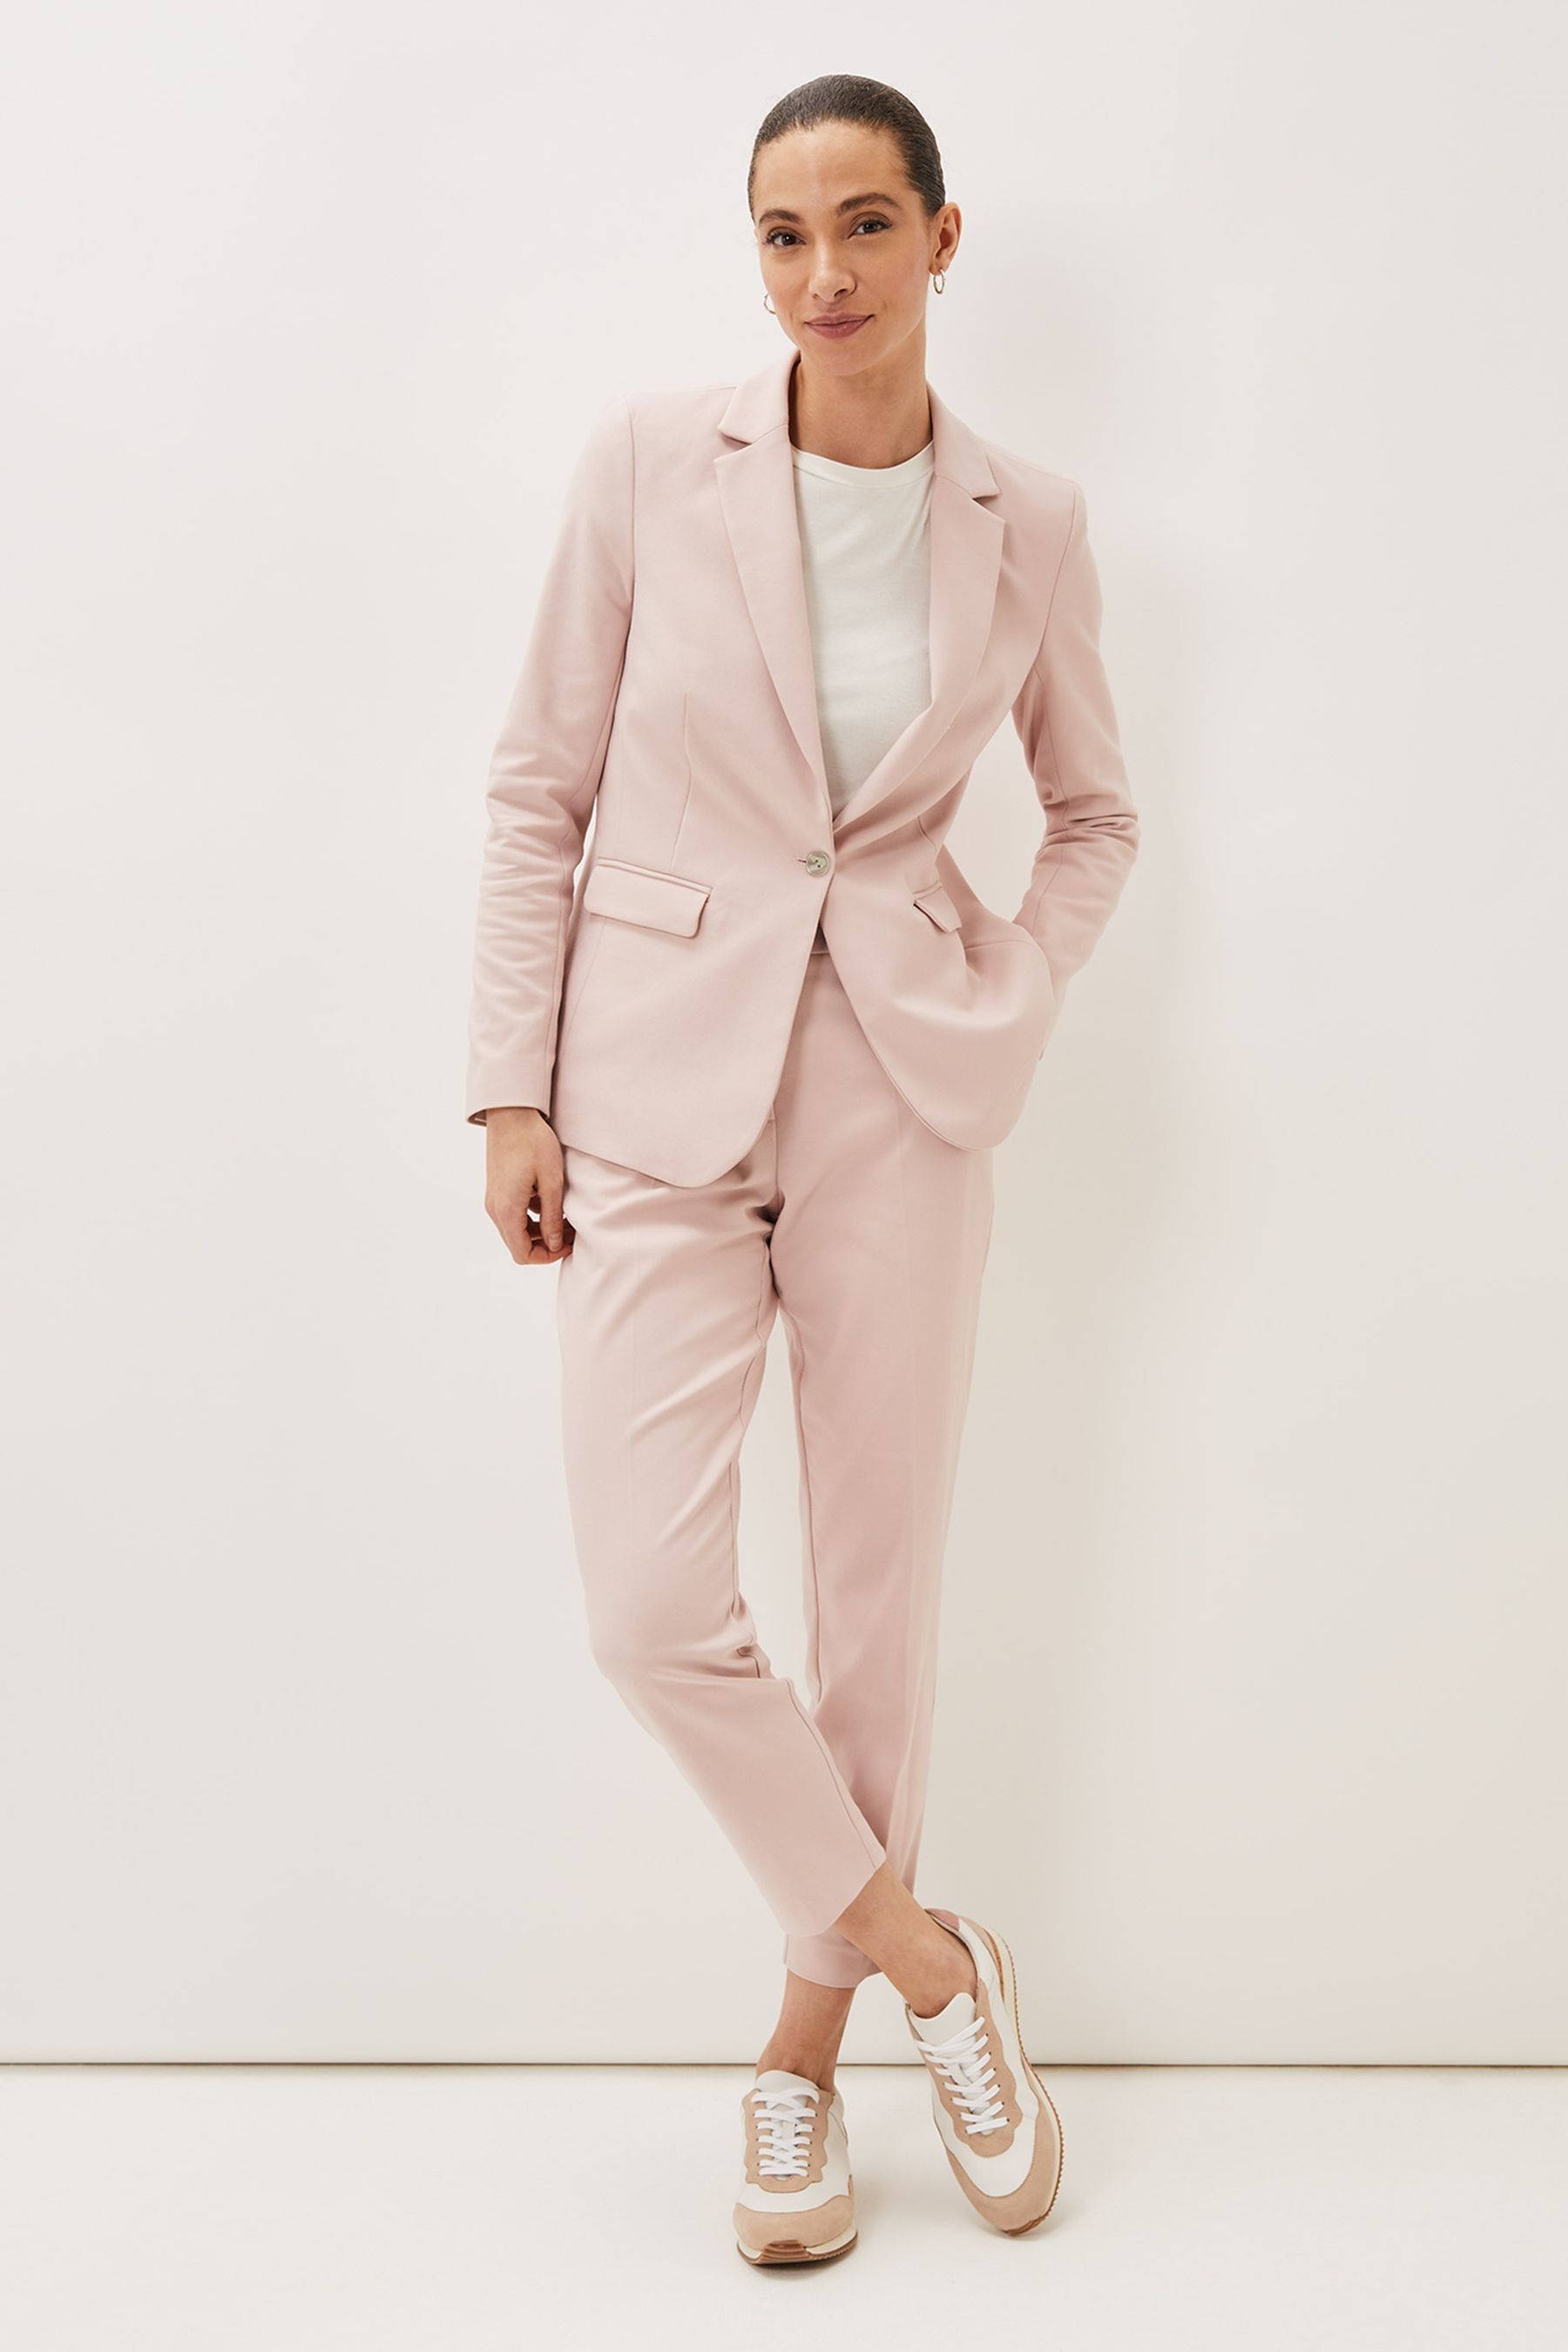 Buy Phase Eight Pink Ulrica Suit Jacket from the Next UK online shop